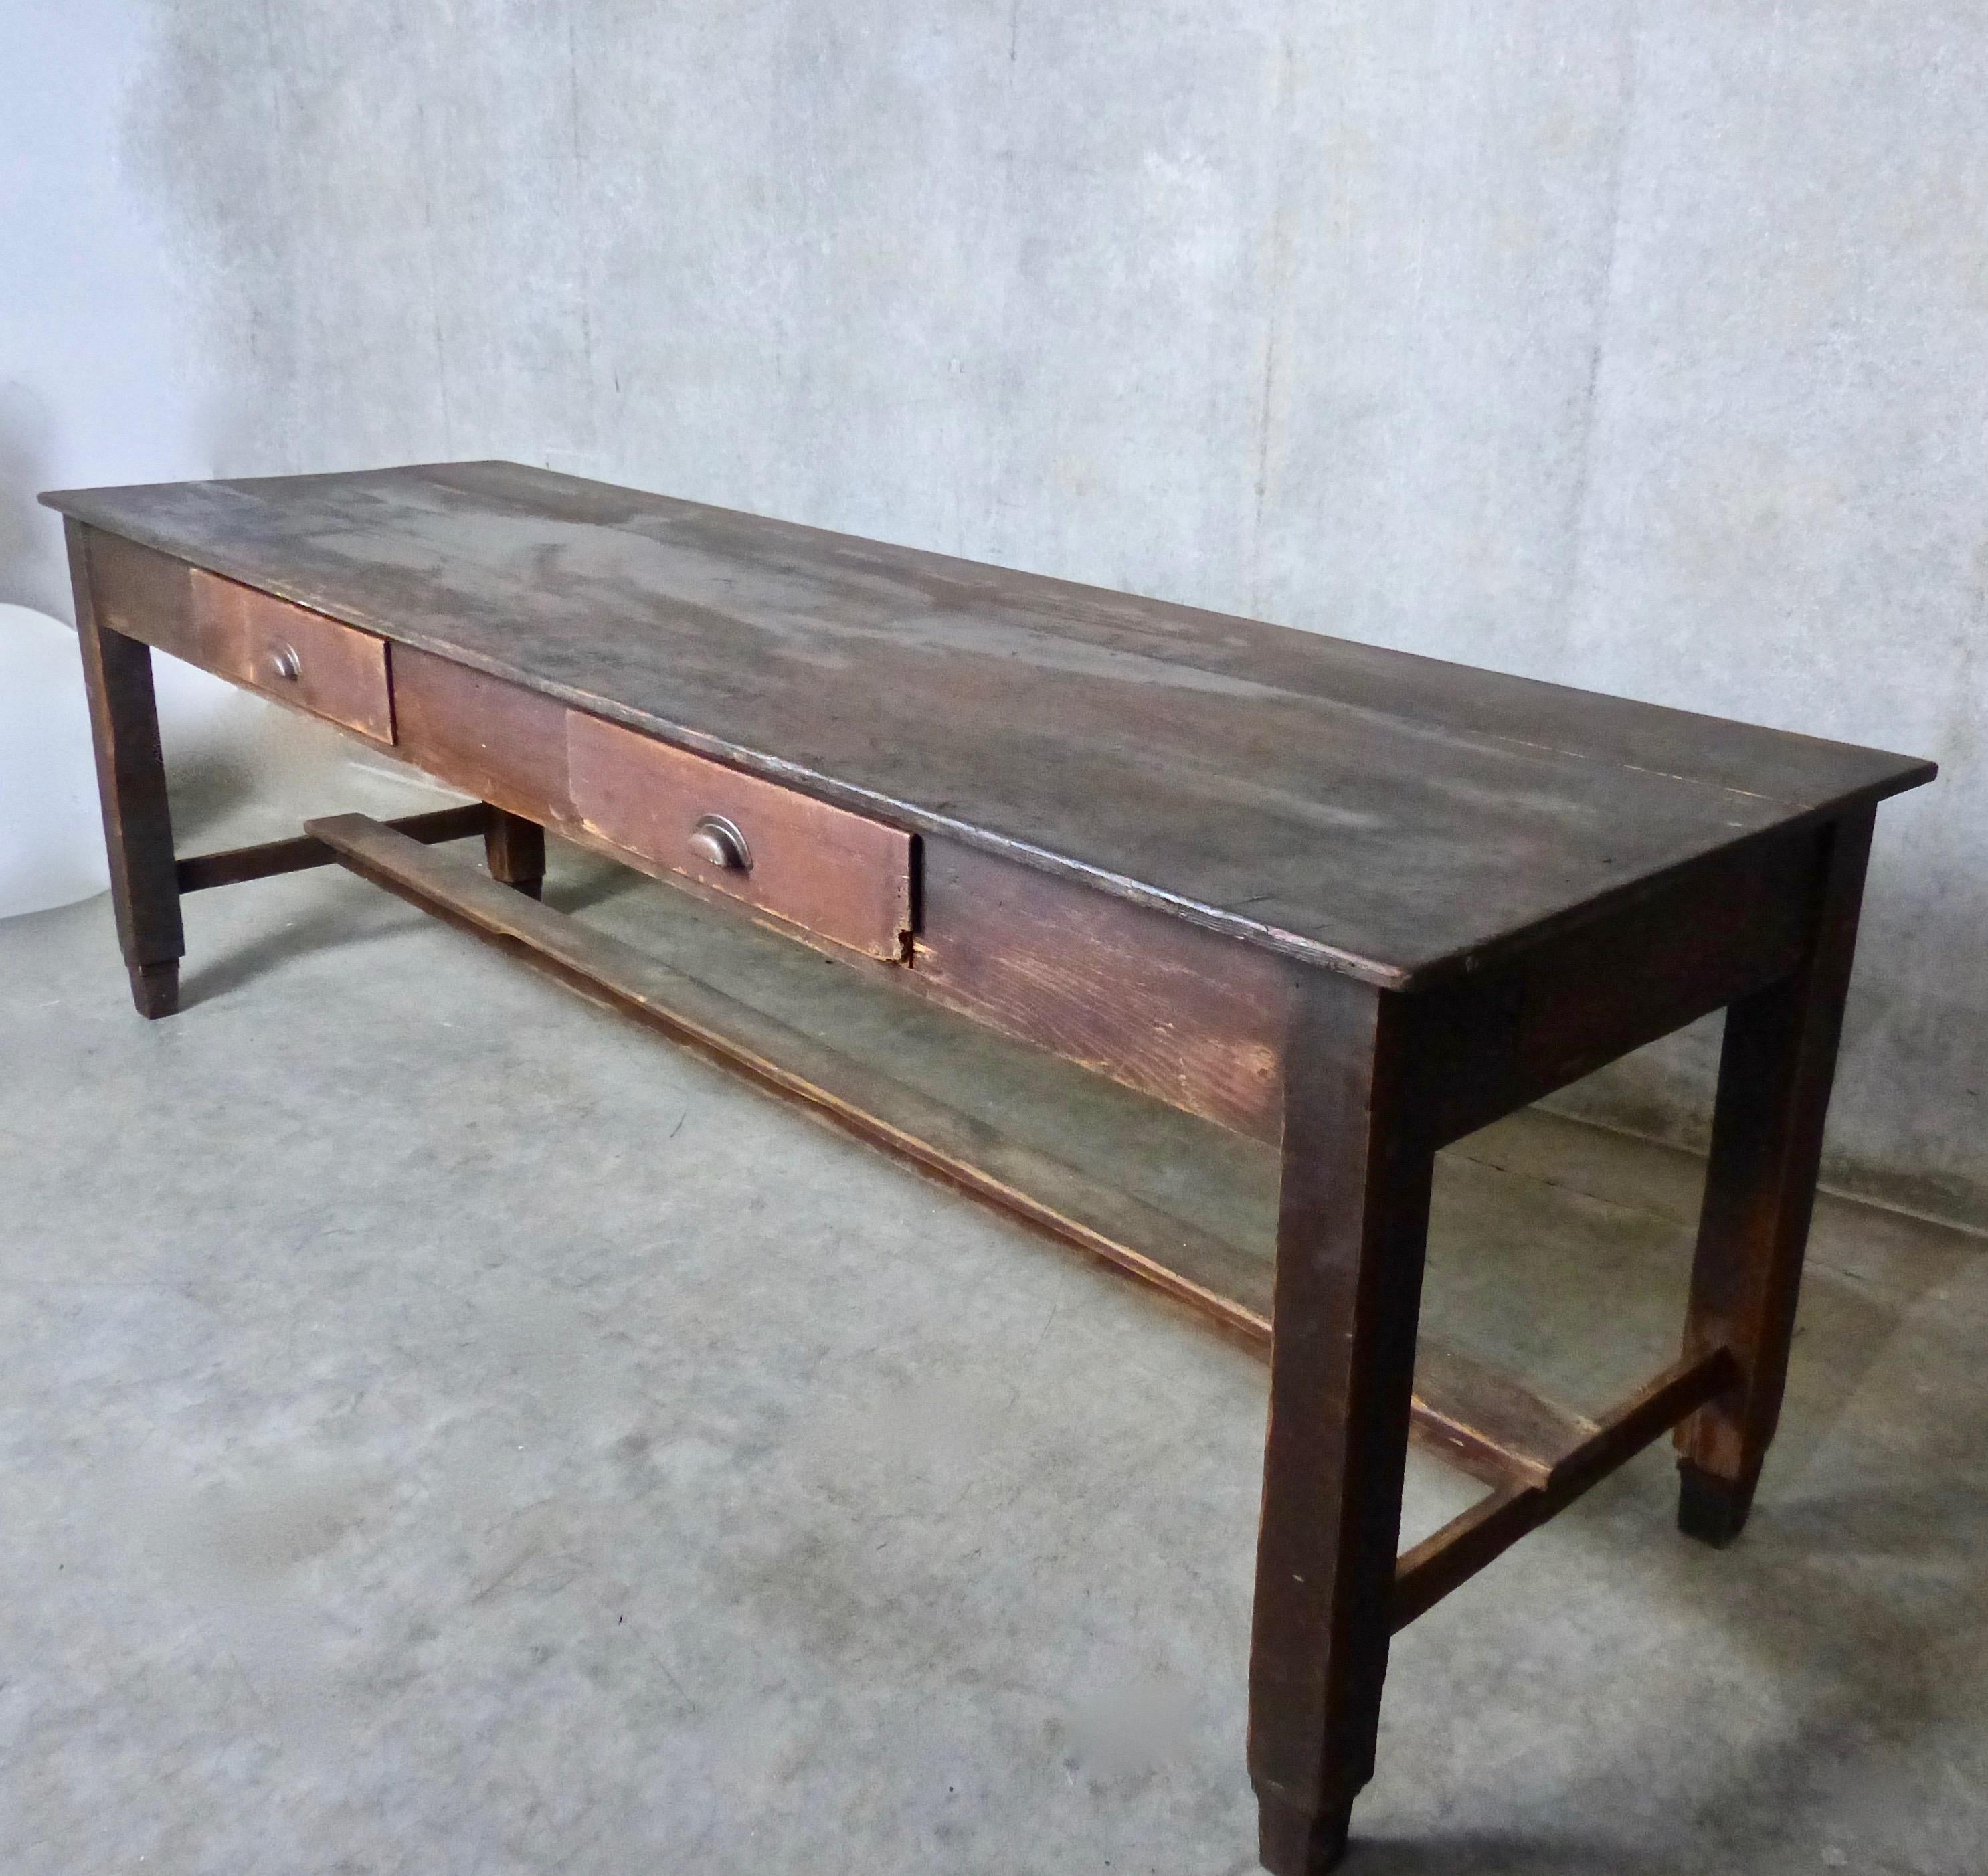 Early 20th Century Fir Wood Country Dining Table, circa 1910